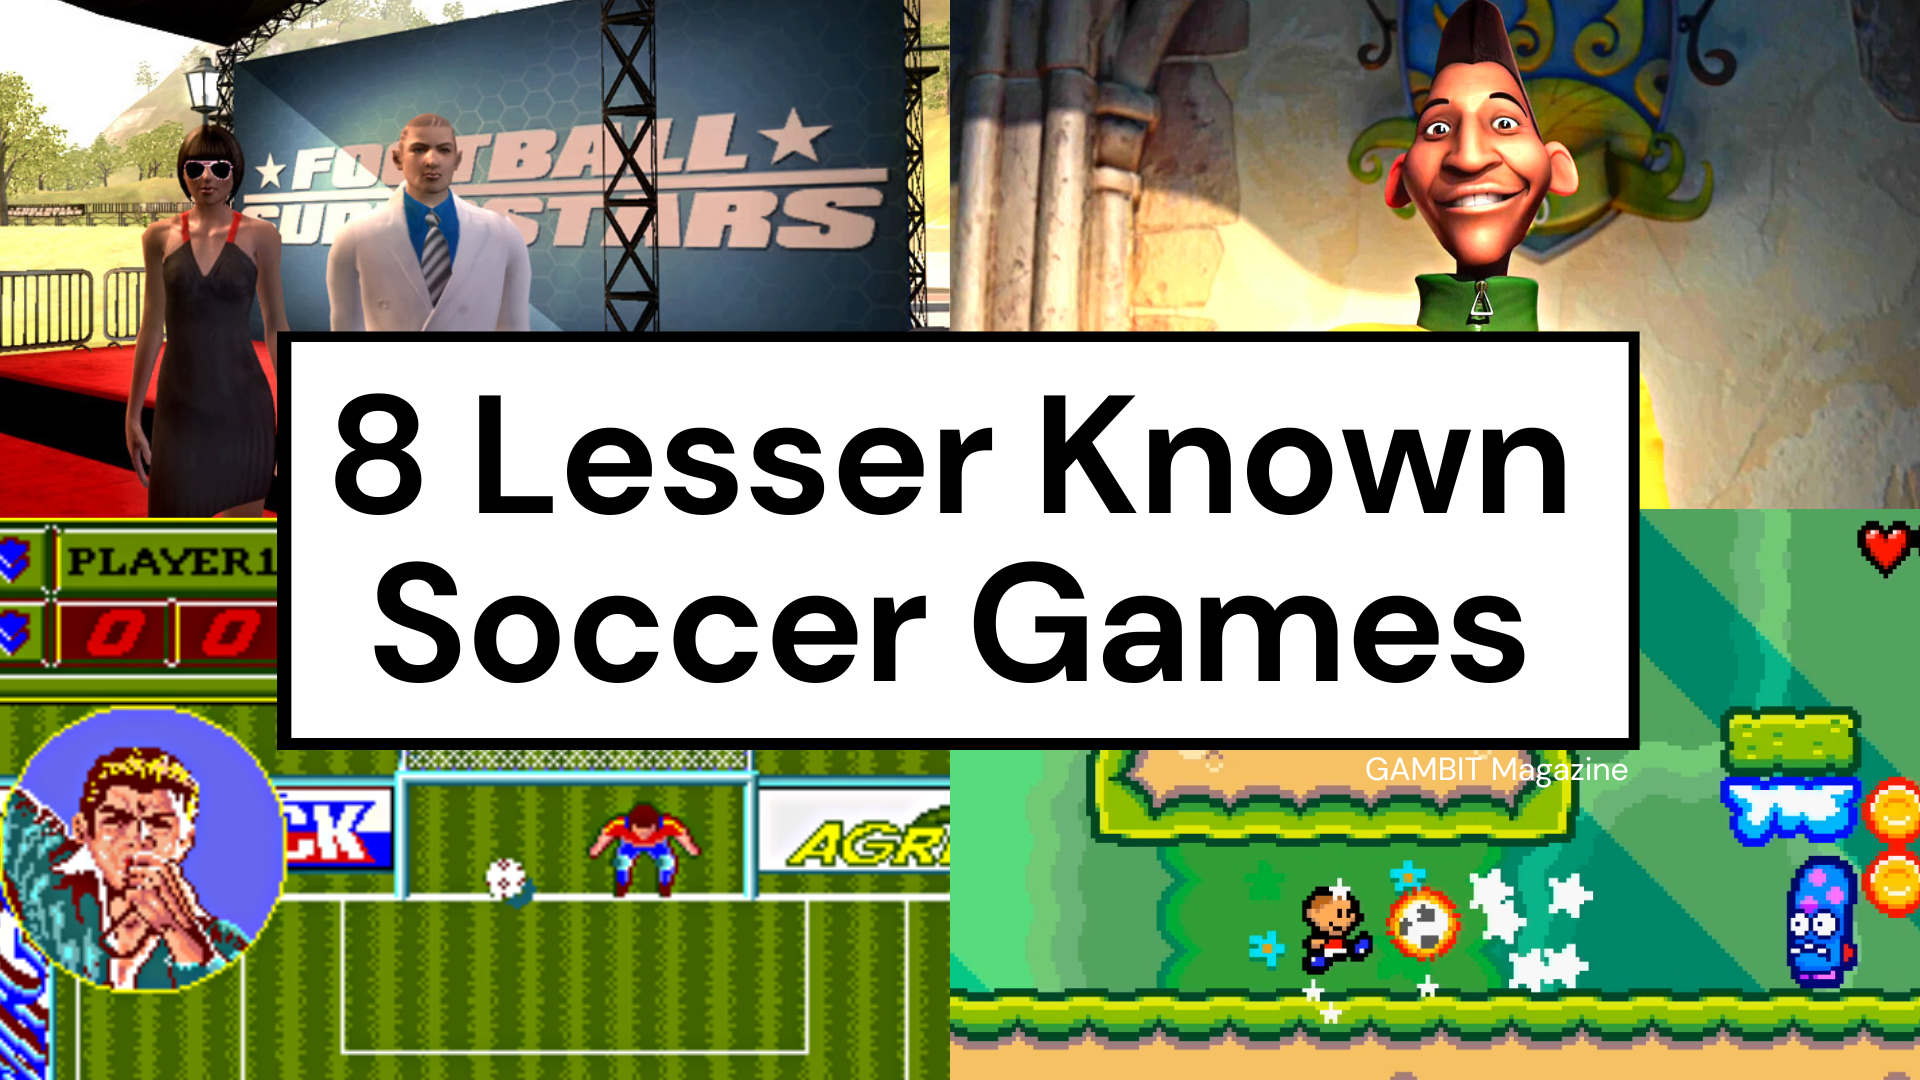 8 Lesser Known Soccer Games